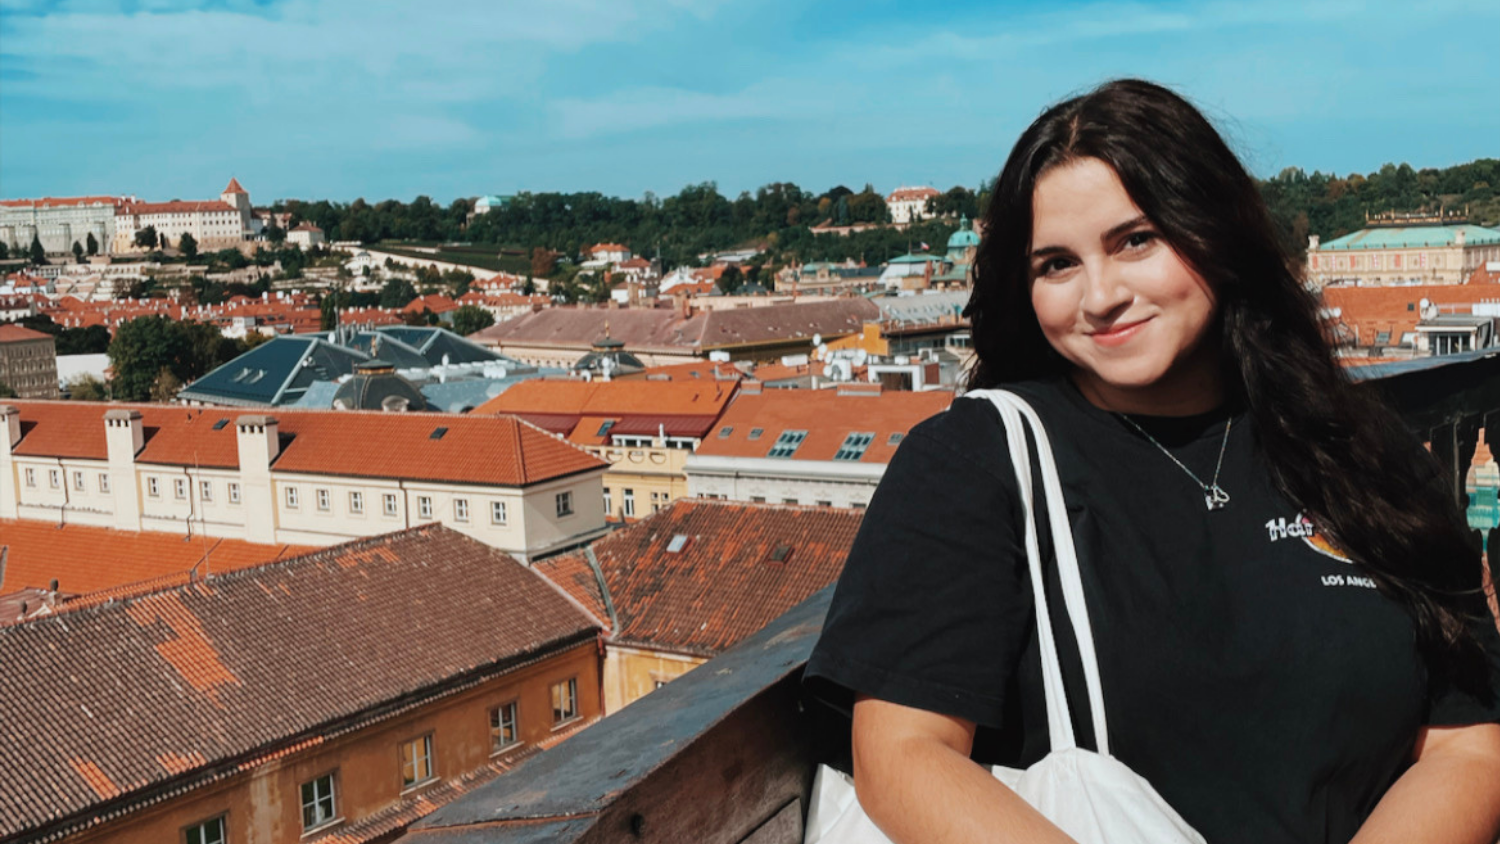 Elizabeth Vanegas taking a photo with the rooftops of Prague in the background